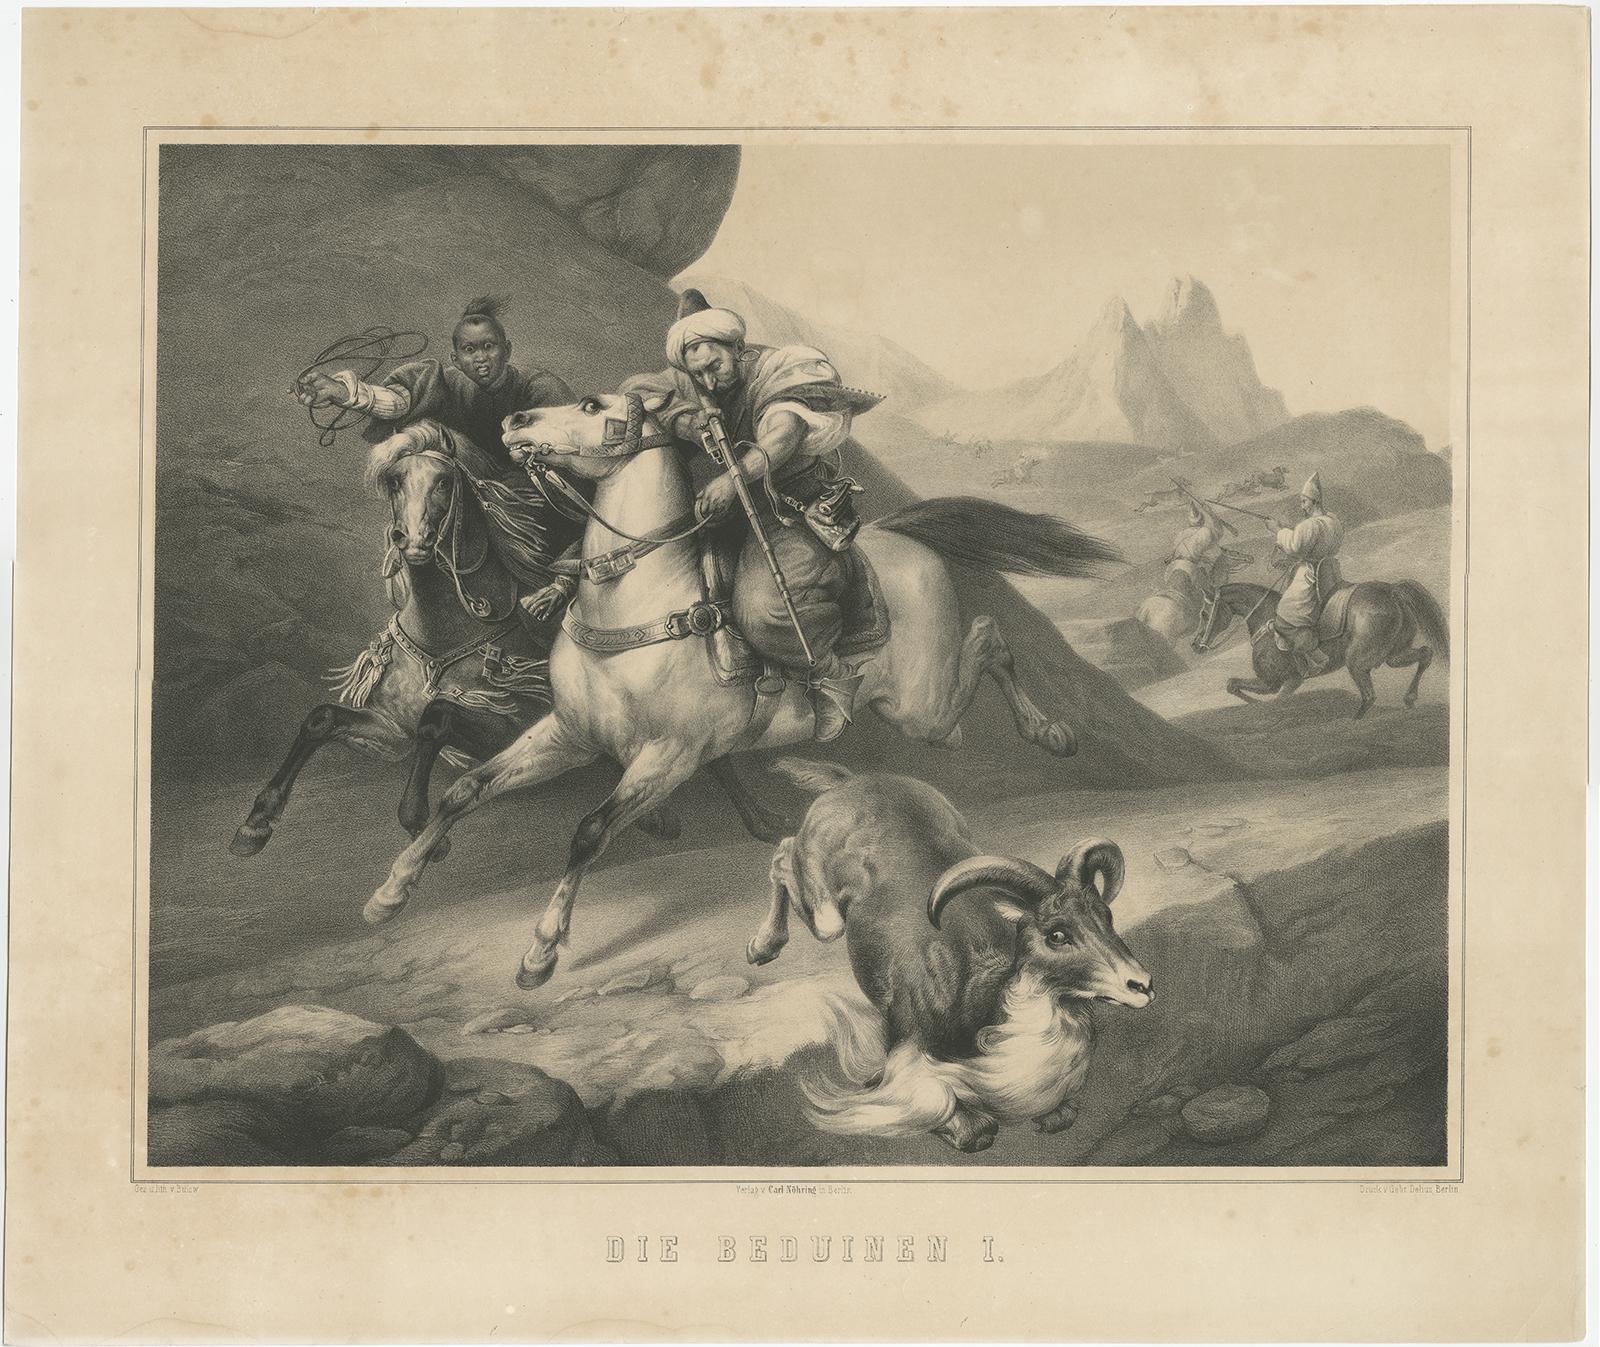 Set of two antique prints titled 'Die Beduinen I & II'. Lithographic plates depicting scenes of the Bedouin, a population of nomadic Arabs who have historically inhabited the desert regions in North Africa, the Arabian Peninsula, Upper Mesopotamia